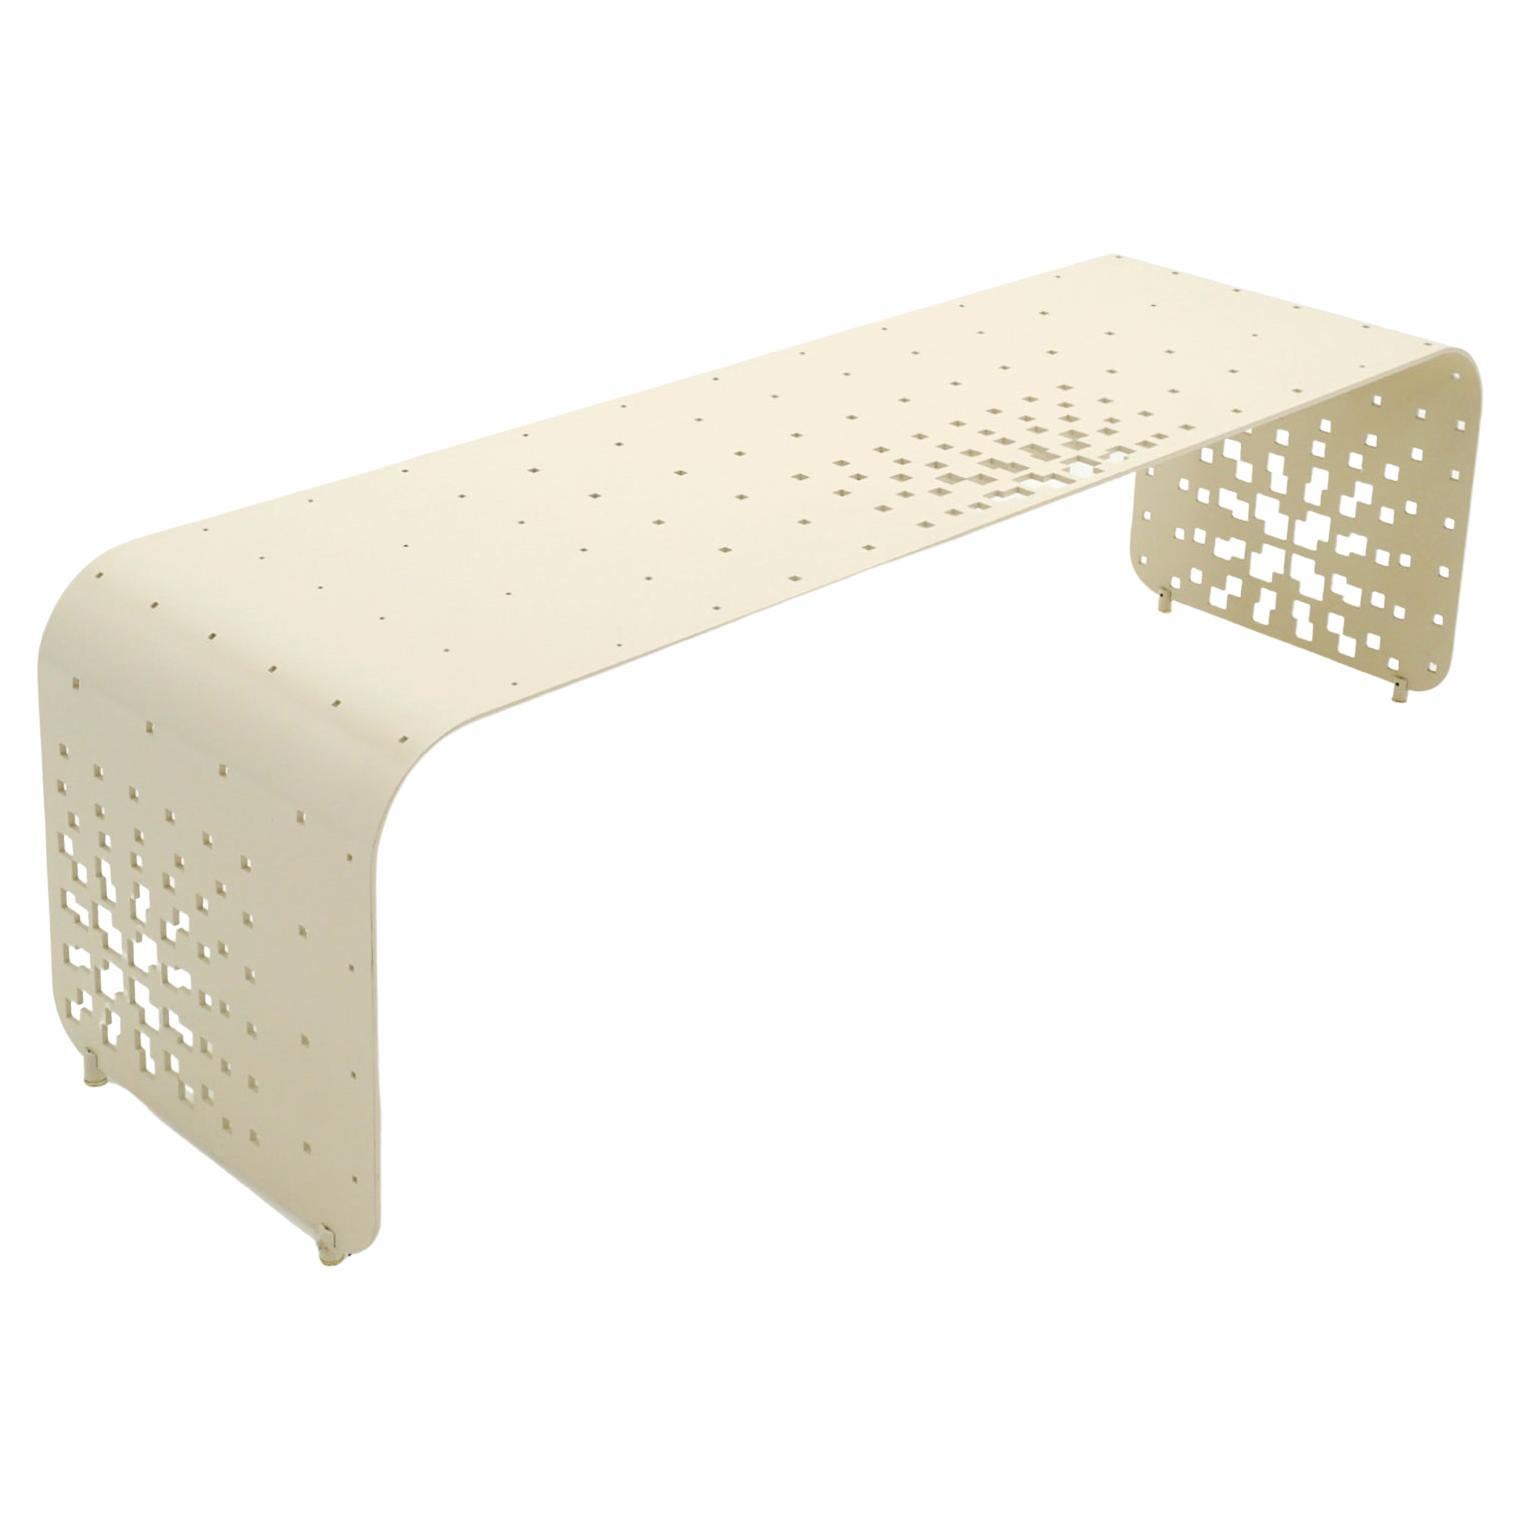 Bench / Coffee Table in Off White / Ivory by Yves Behar for Orange 22